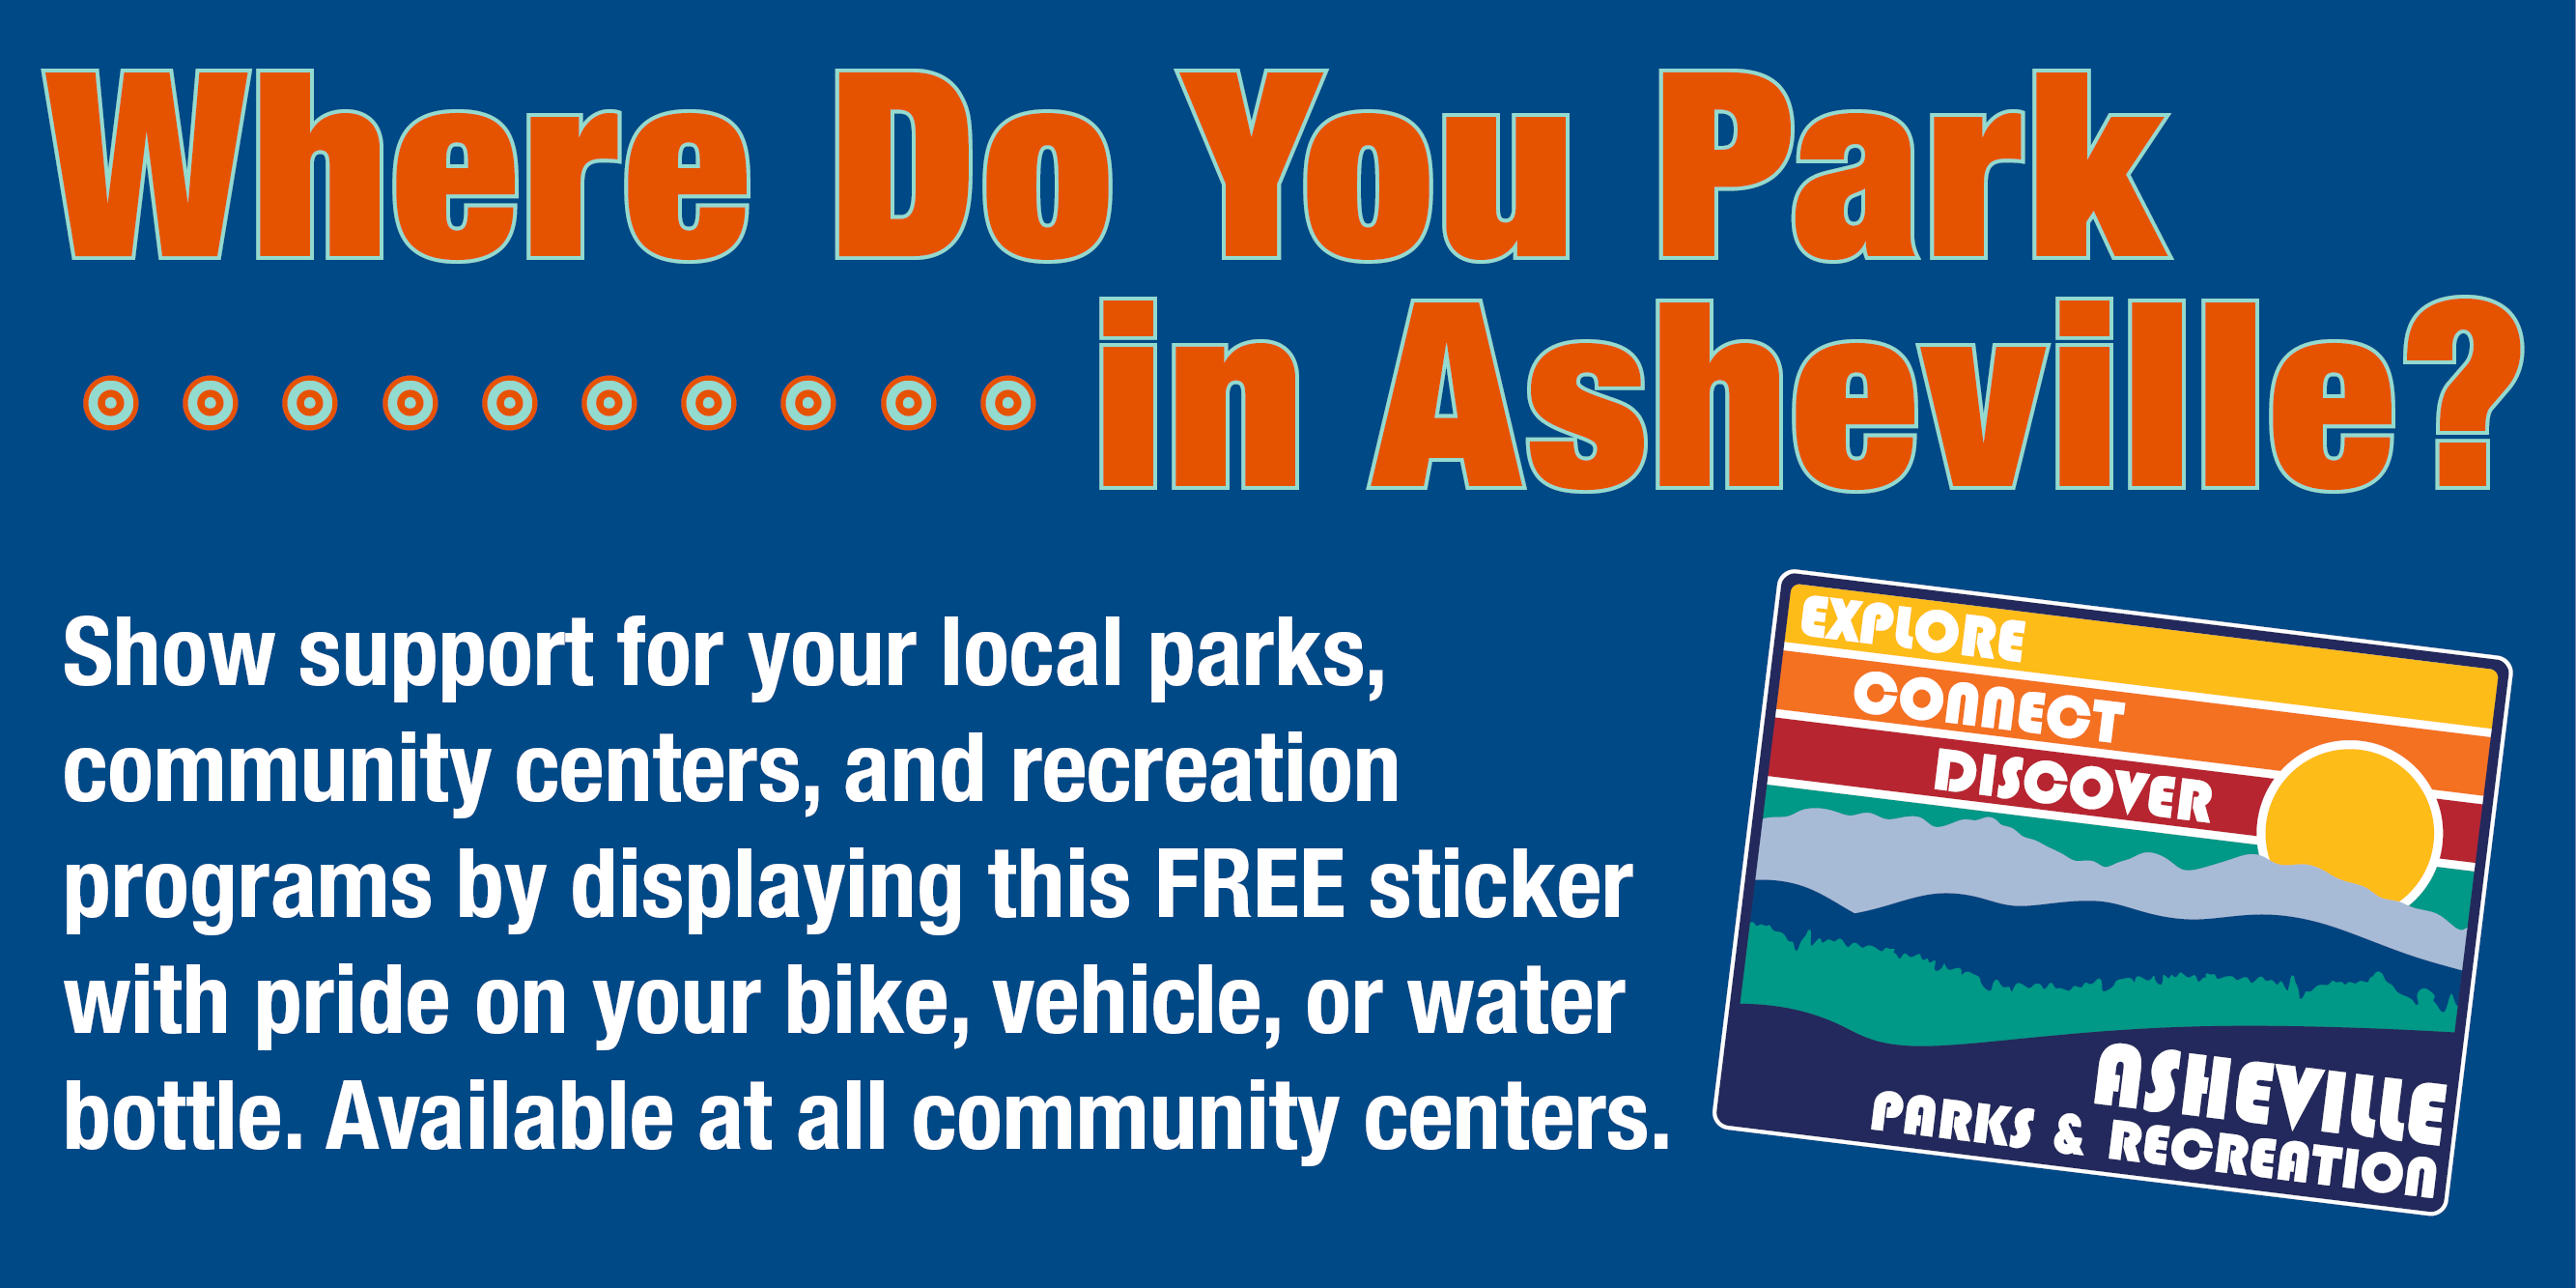 Sticker showing sunrise over the mountains with Explore, Connect, Discover words on it. Remaining text on illustration includes: Where Do You Park? Show support for your local parks, community centers, and recreation programs by displaying this FREE sticker with pride on your bike, vehicle, or water bottle. Available at all community centers.